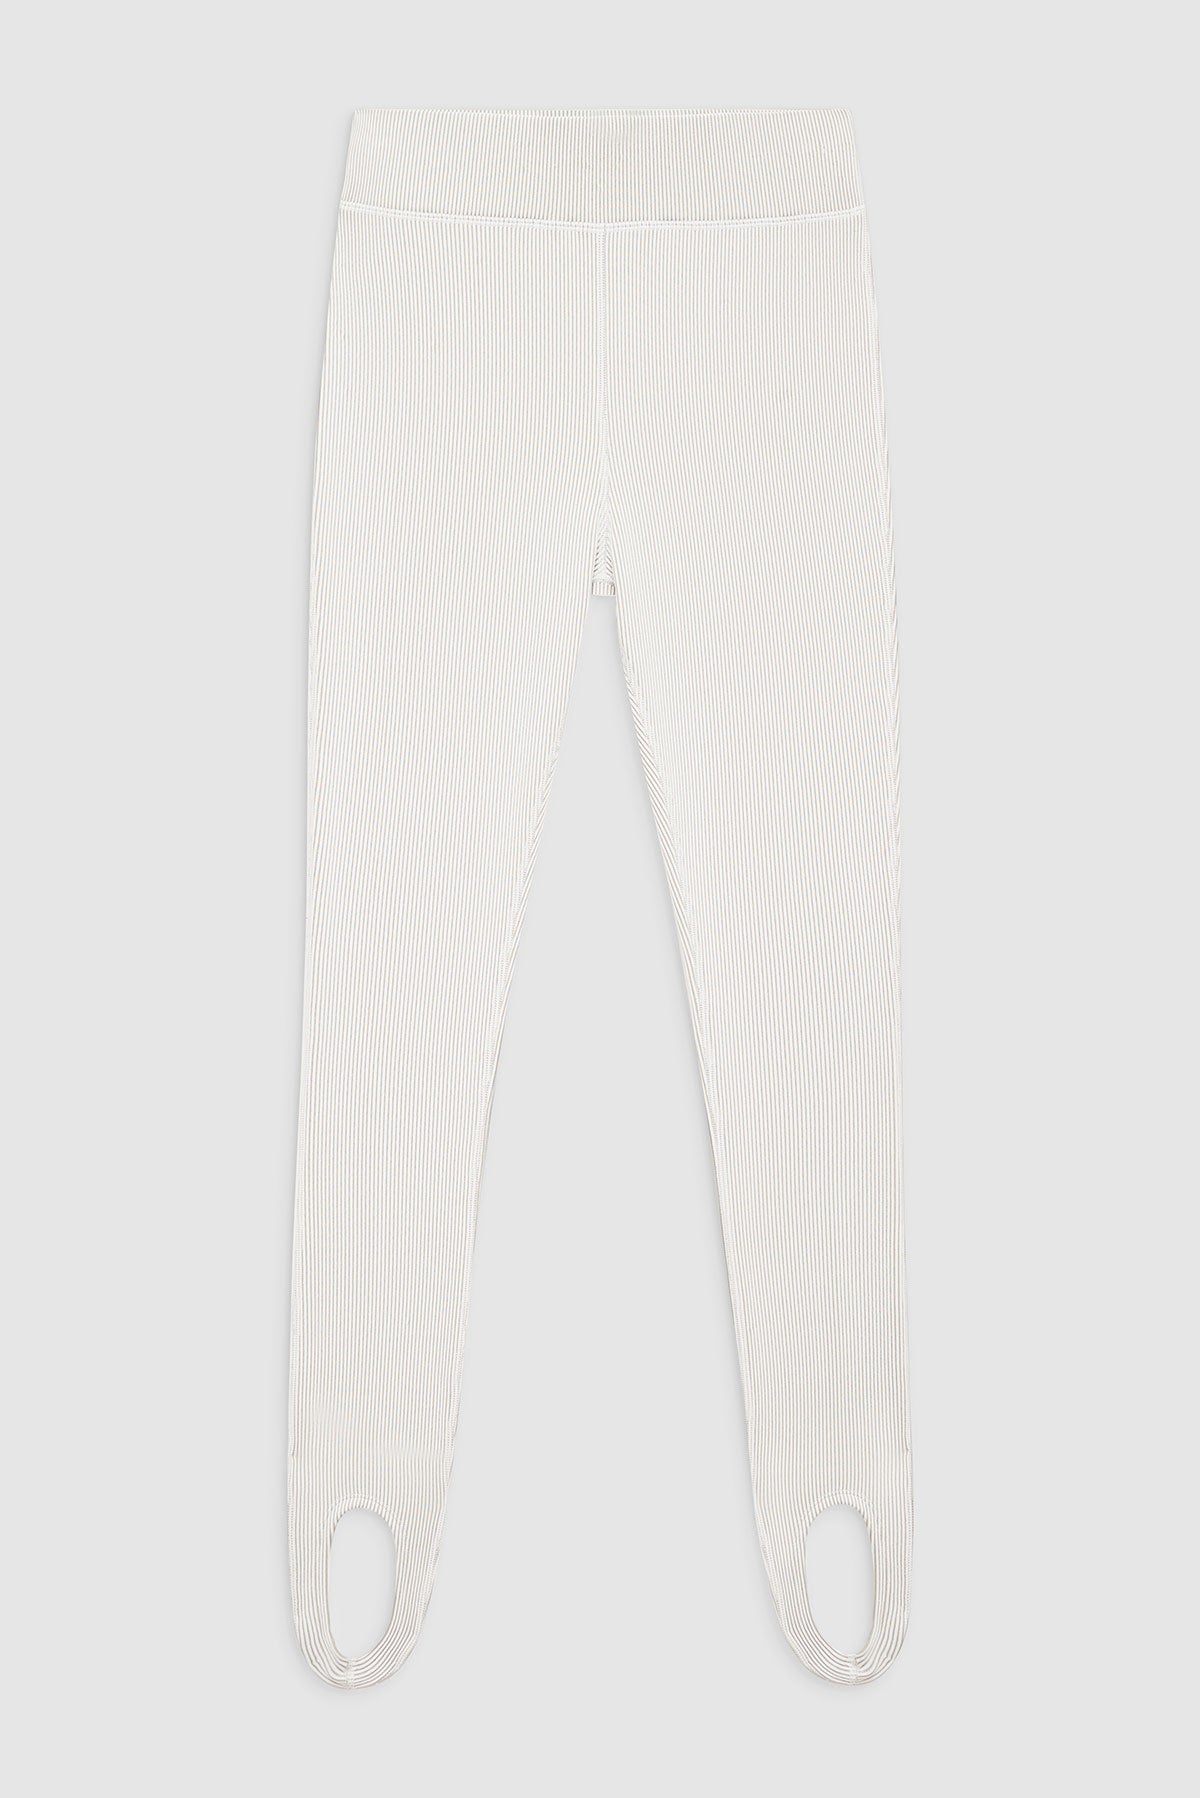 ANINE BING Rhea Legging - Ivory And Tan - Front View